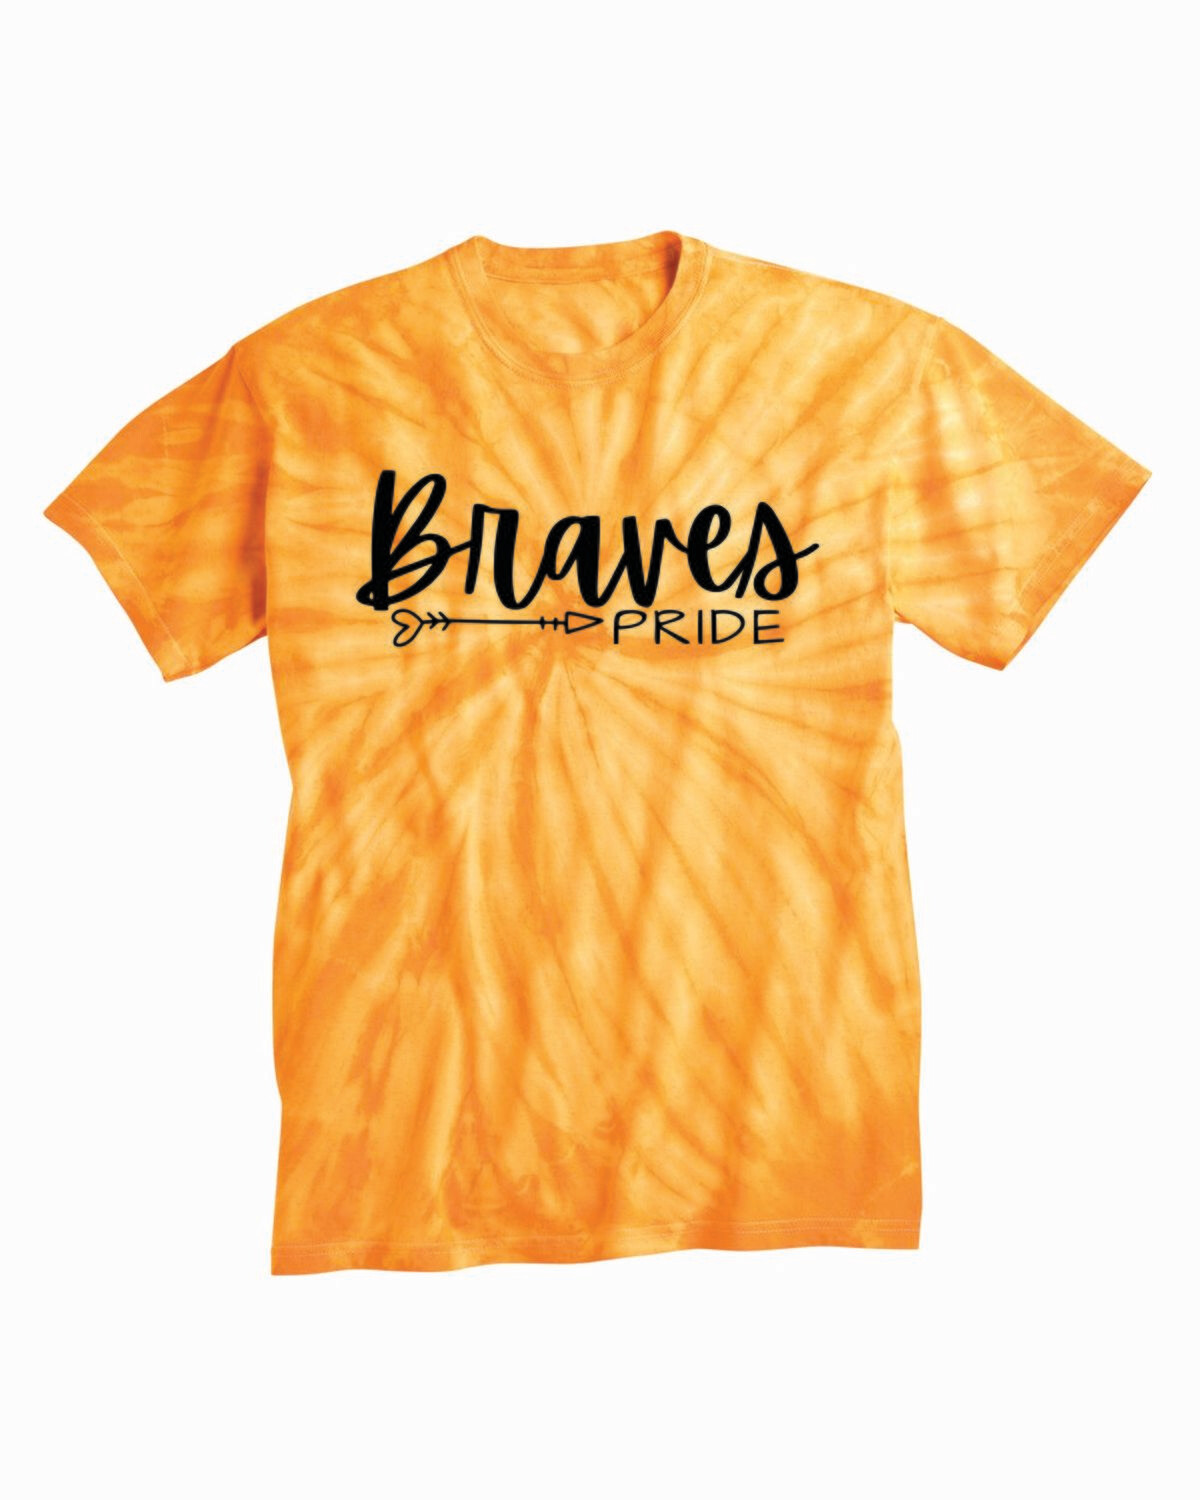 Braves PRIDE Tie Dyed T-shirt, Gold